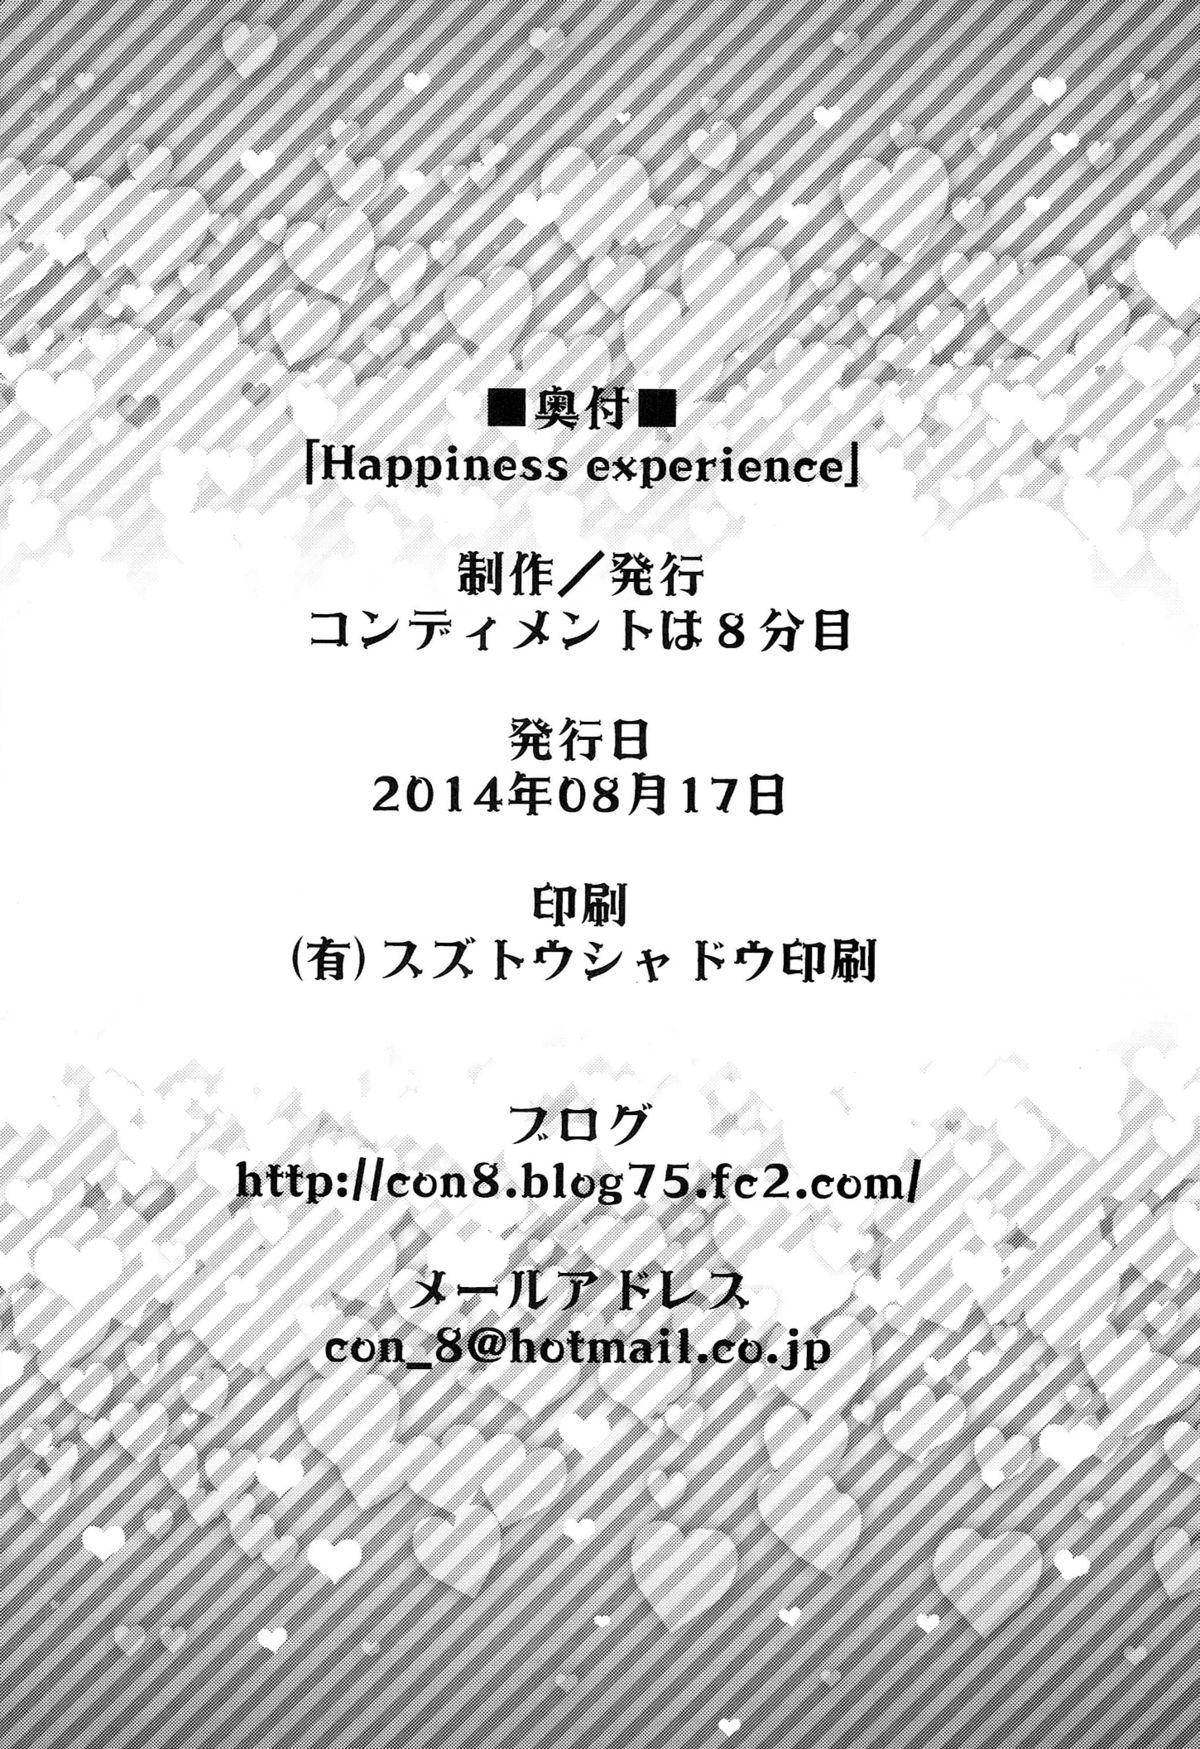 Happiness experience 36